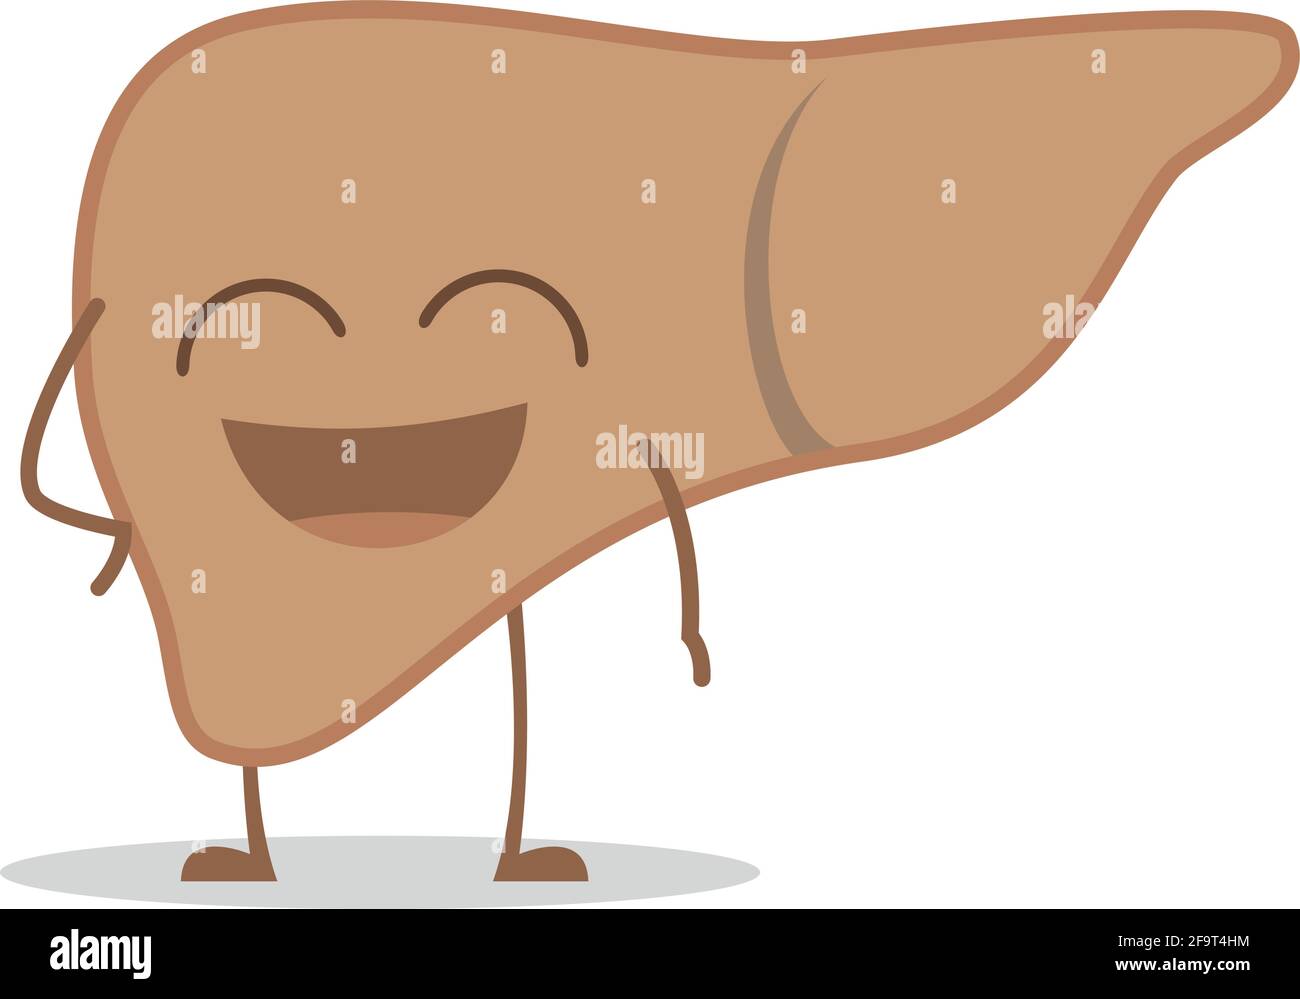 Vector illustration of a healthy and funny liver in cartoon style. Stock Vector